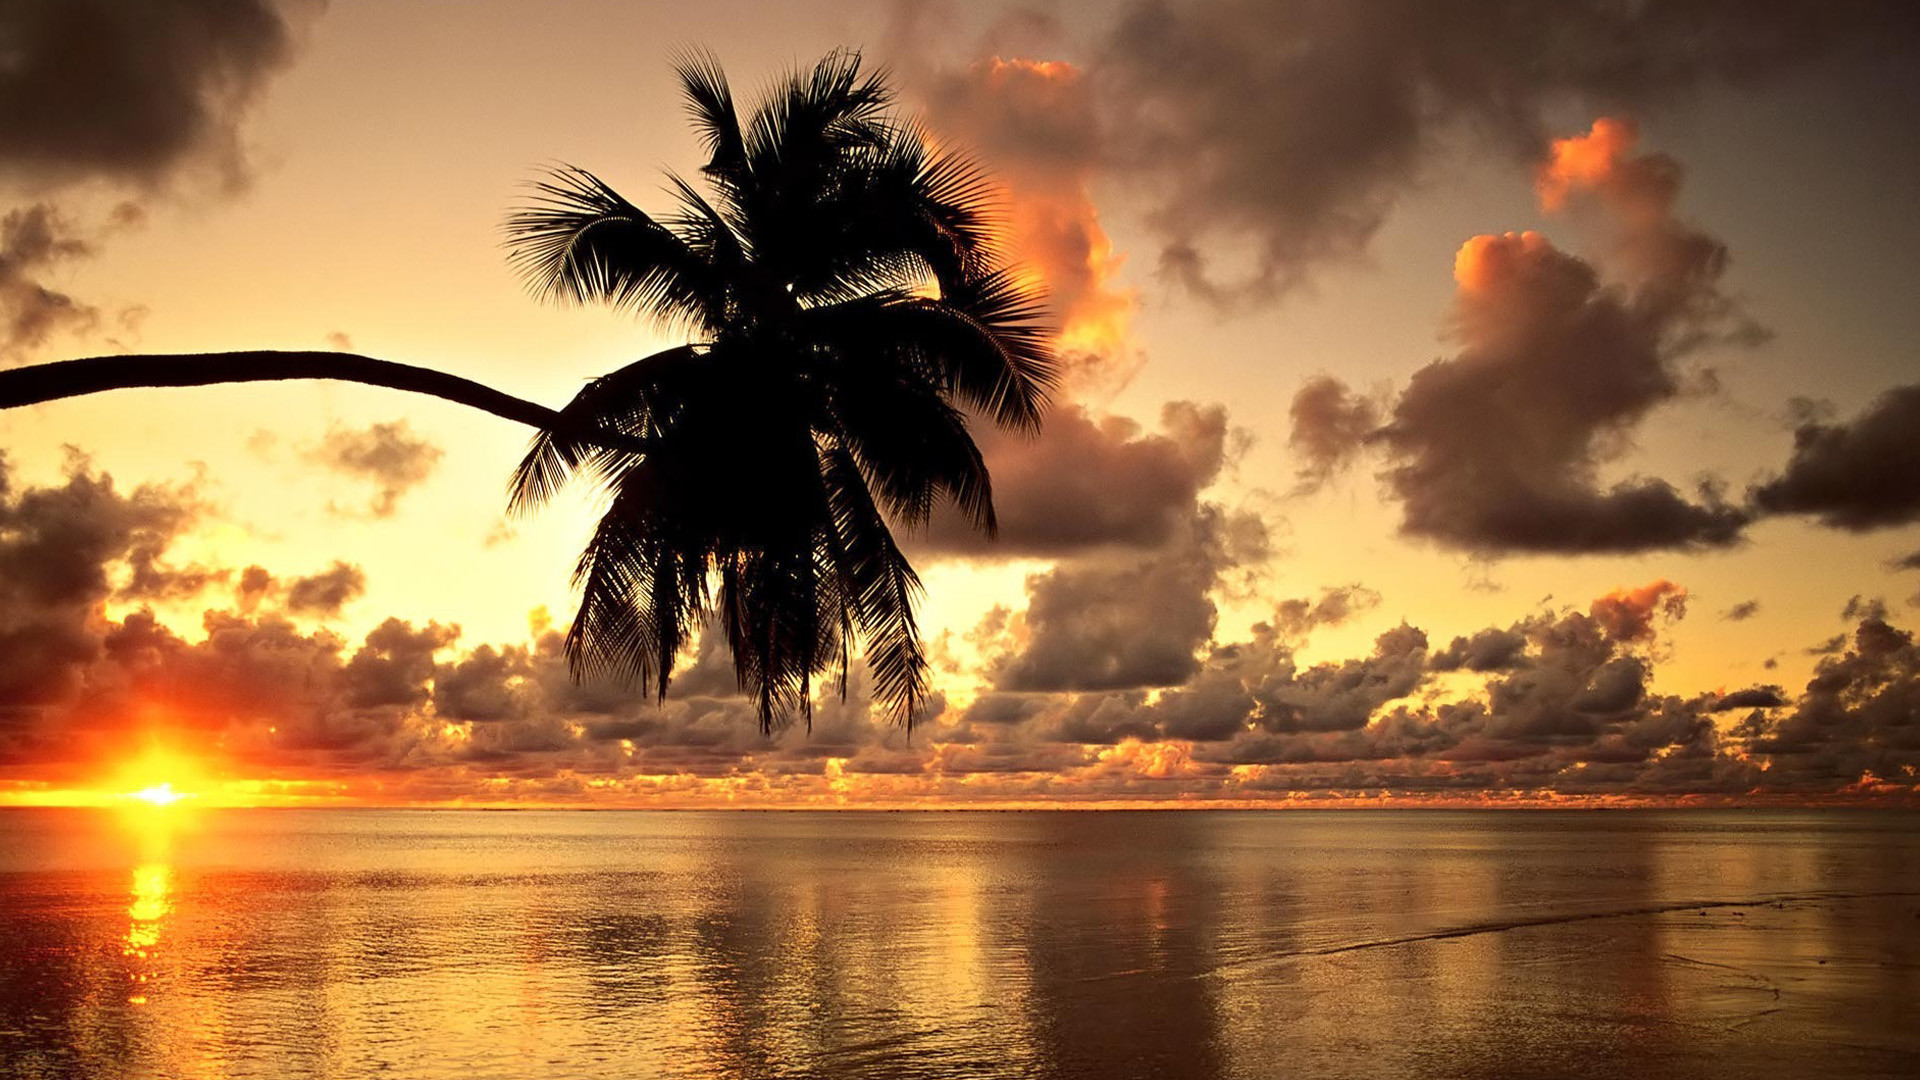 Tropical sunset beach beautiful scenery Wallpapers, Beach Pictures .